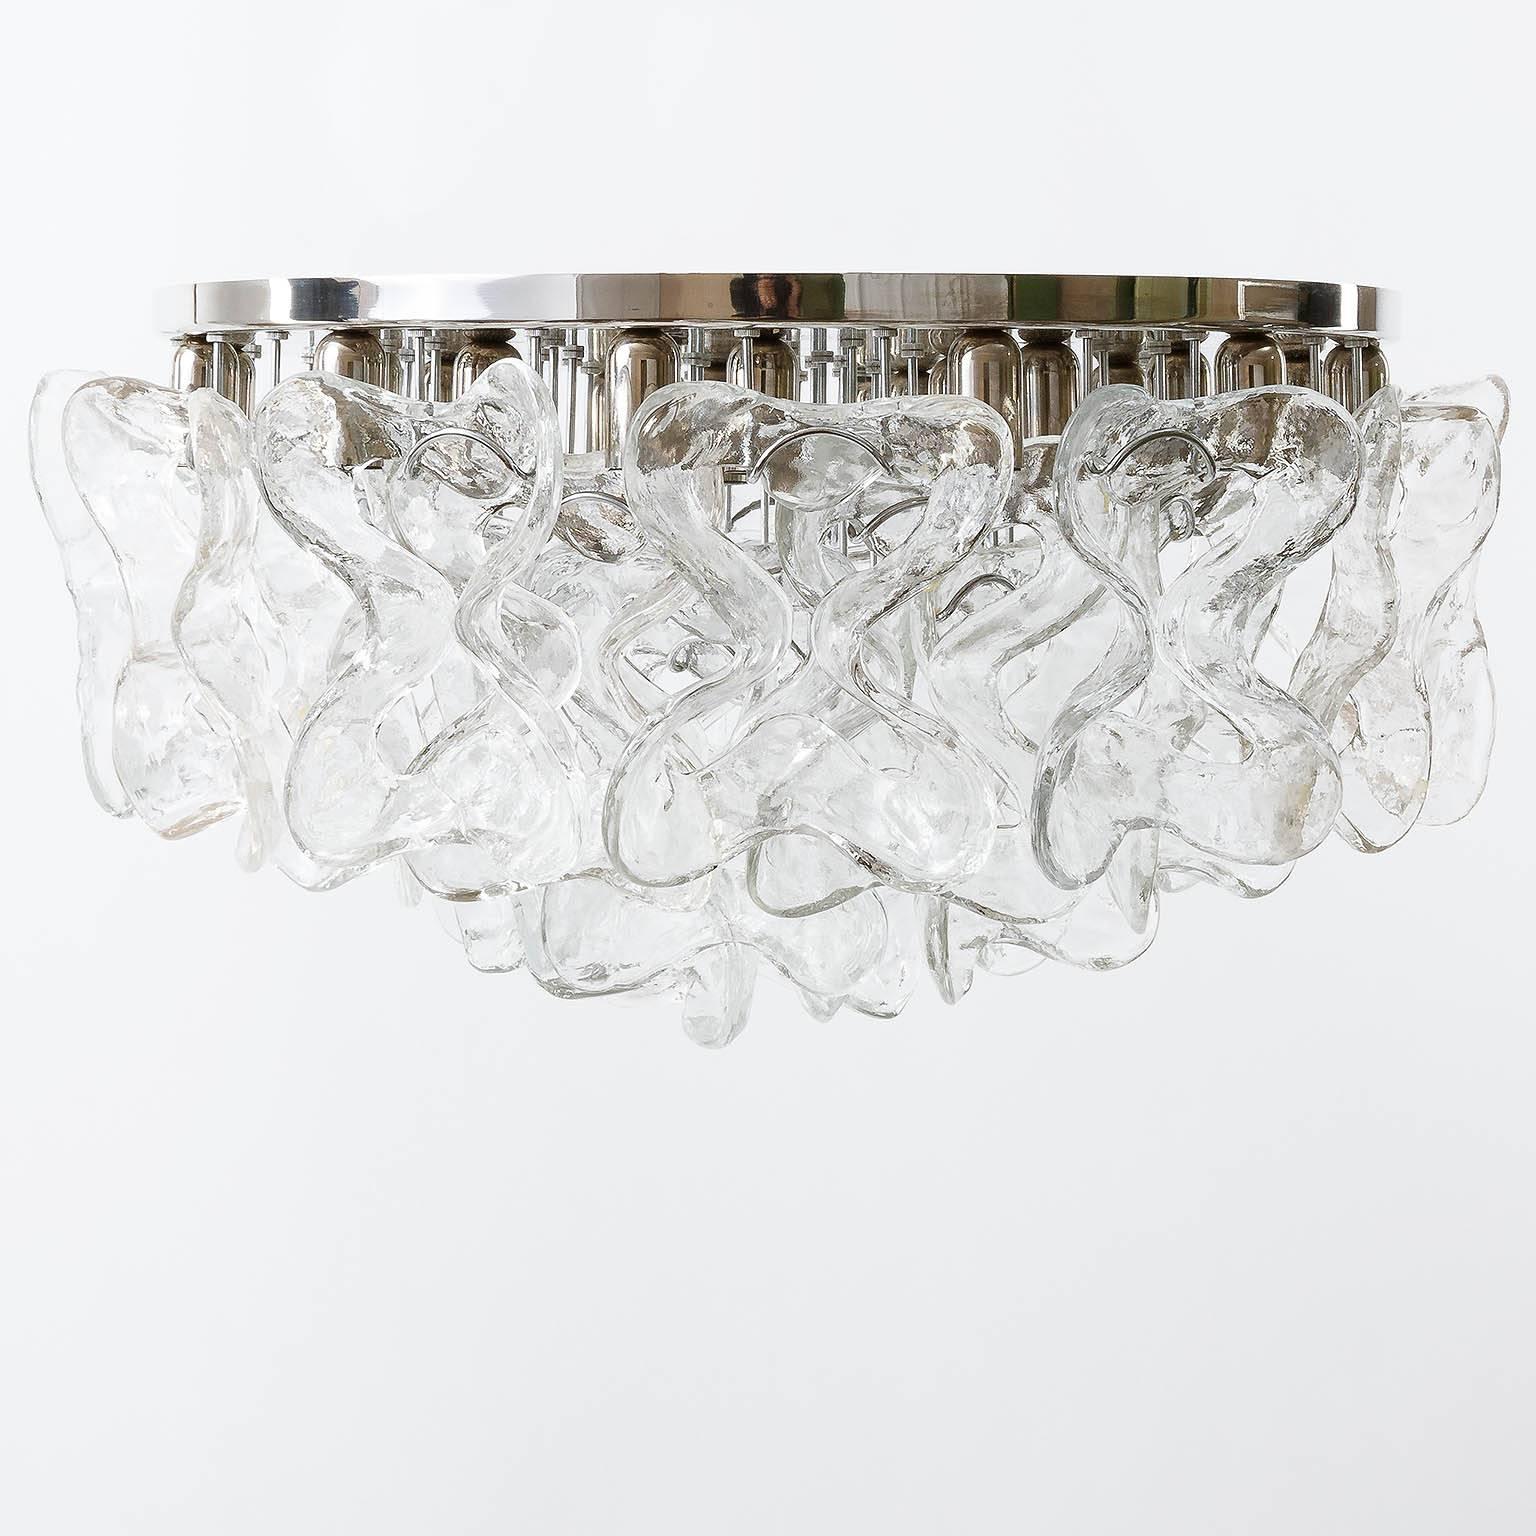 A fantastic light fixture model "Catena" by J.T. Kalmar, Austria, manufatured in Mid-Century (1970s-1980s). It is made of a chromed backplate with 30 Murano glass elements. Each glass measures 8" x 6" (20 x 15 cm). It takes 24